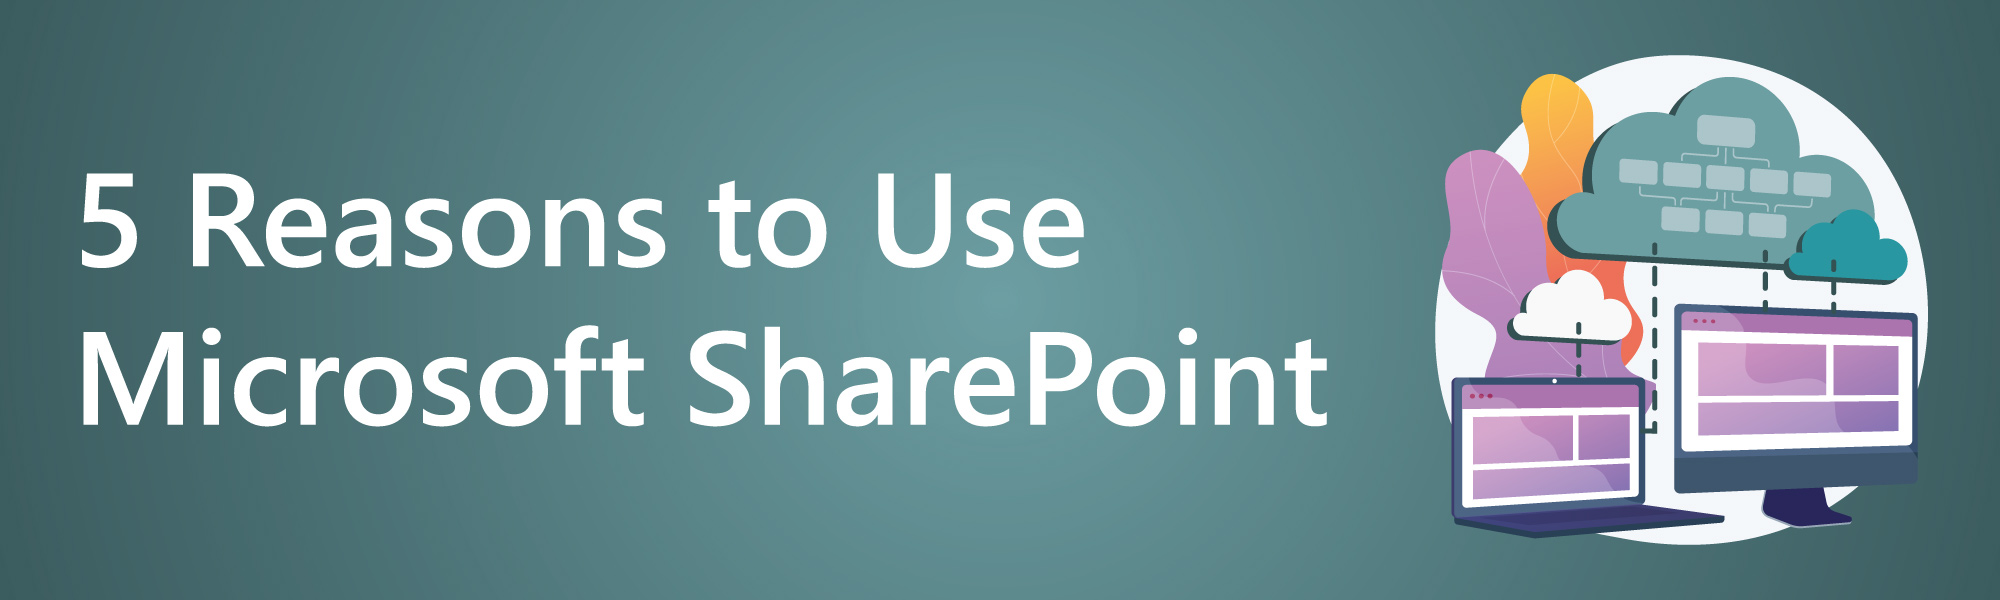 5-Reasons-To-Use-Microsoft-SharePoint-Banner